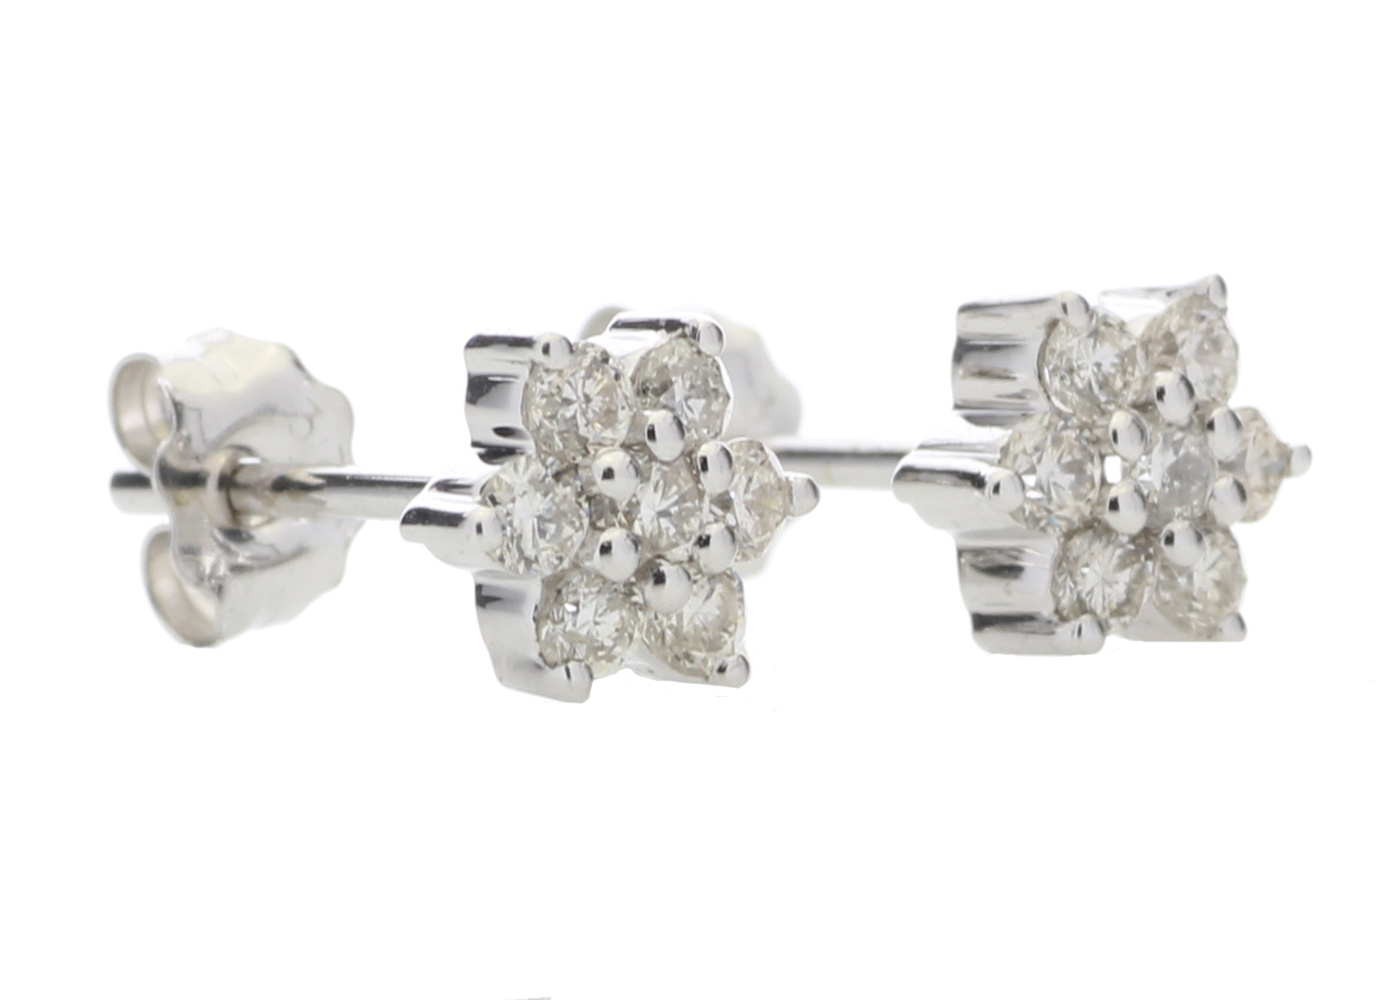 9ct White Gold Diamond Flower Earring 0.45 Carats - Image 4 of 4